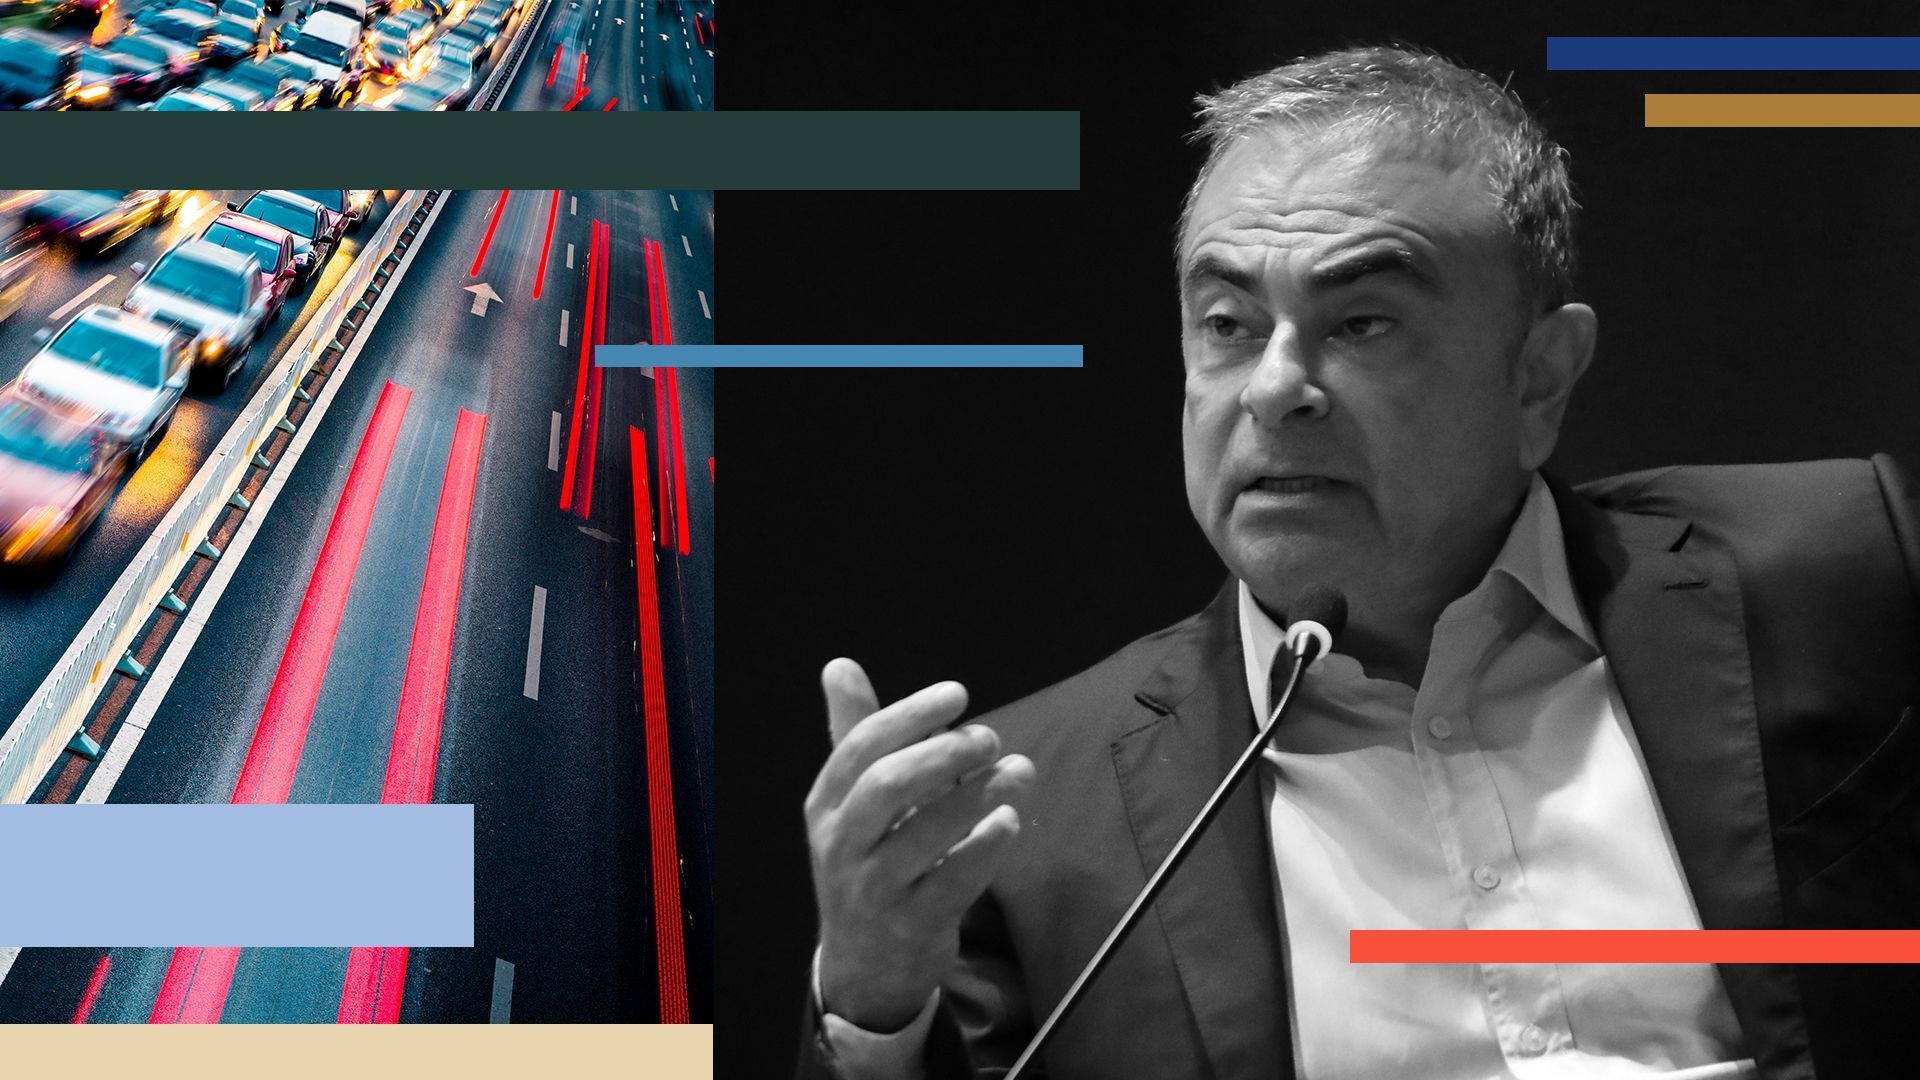 Photo illustration of Carlos Ghosn with cars and abstract shapes.